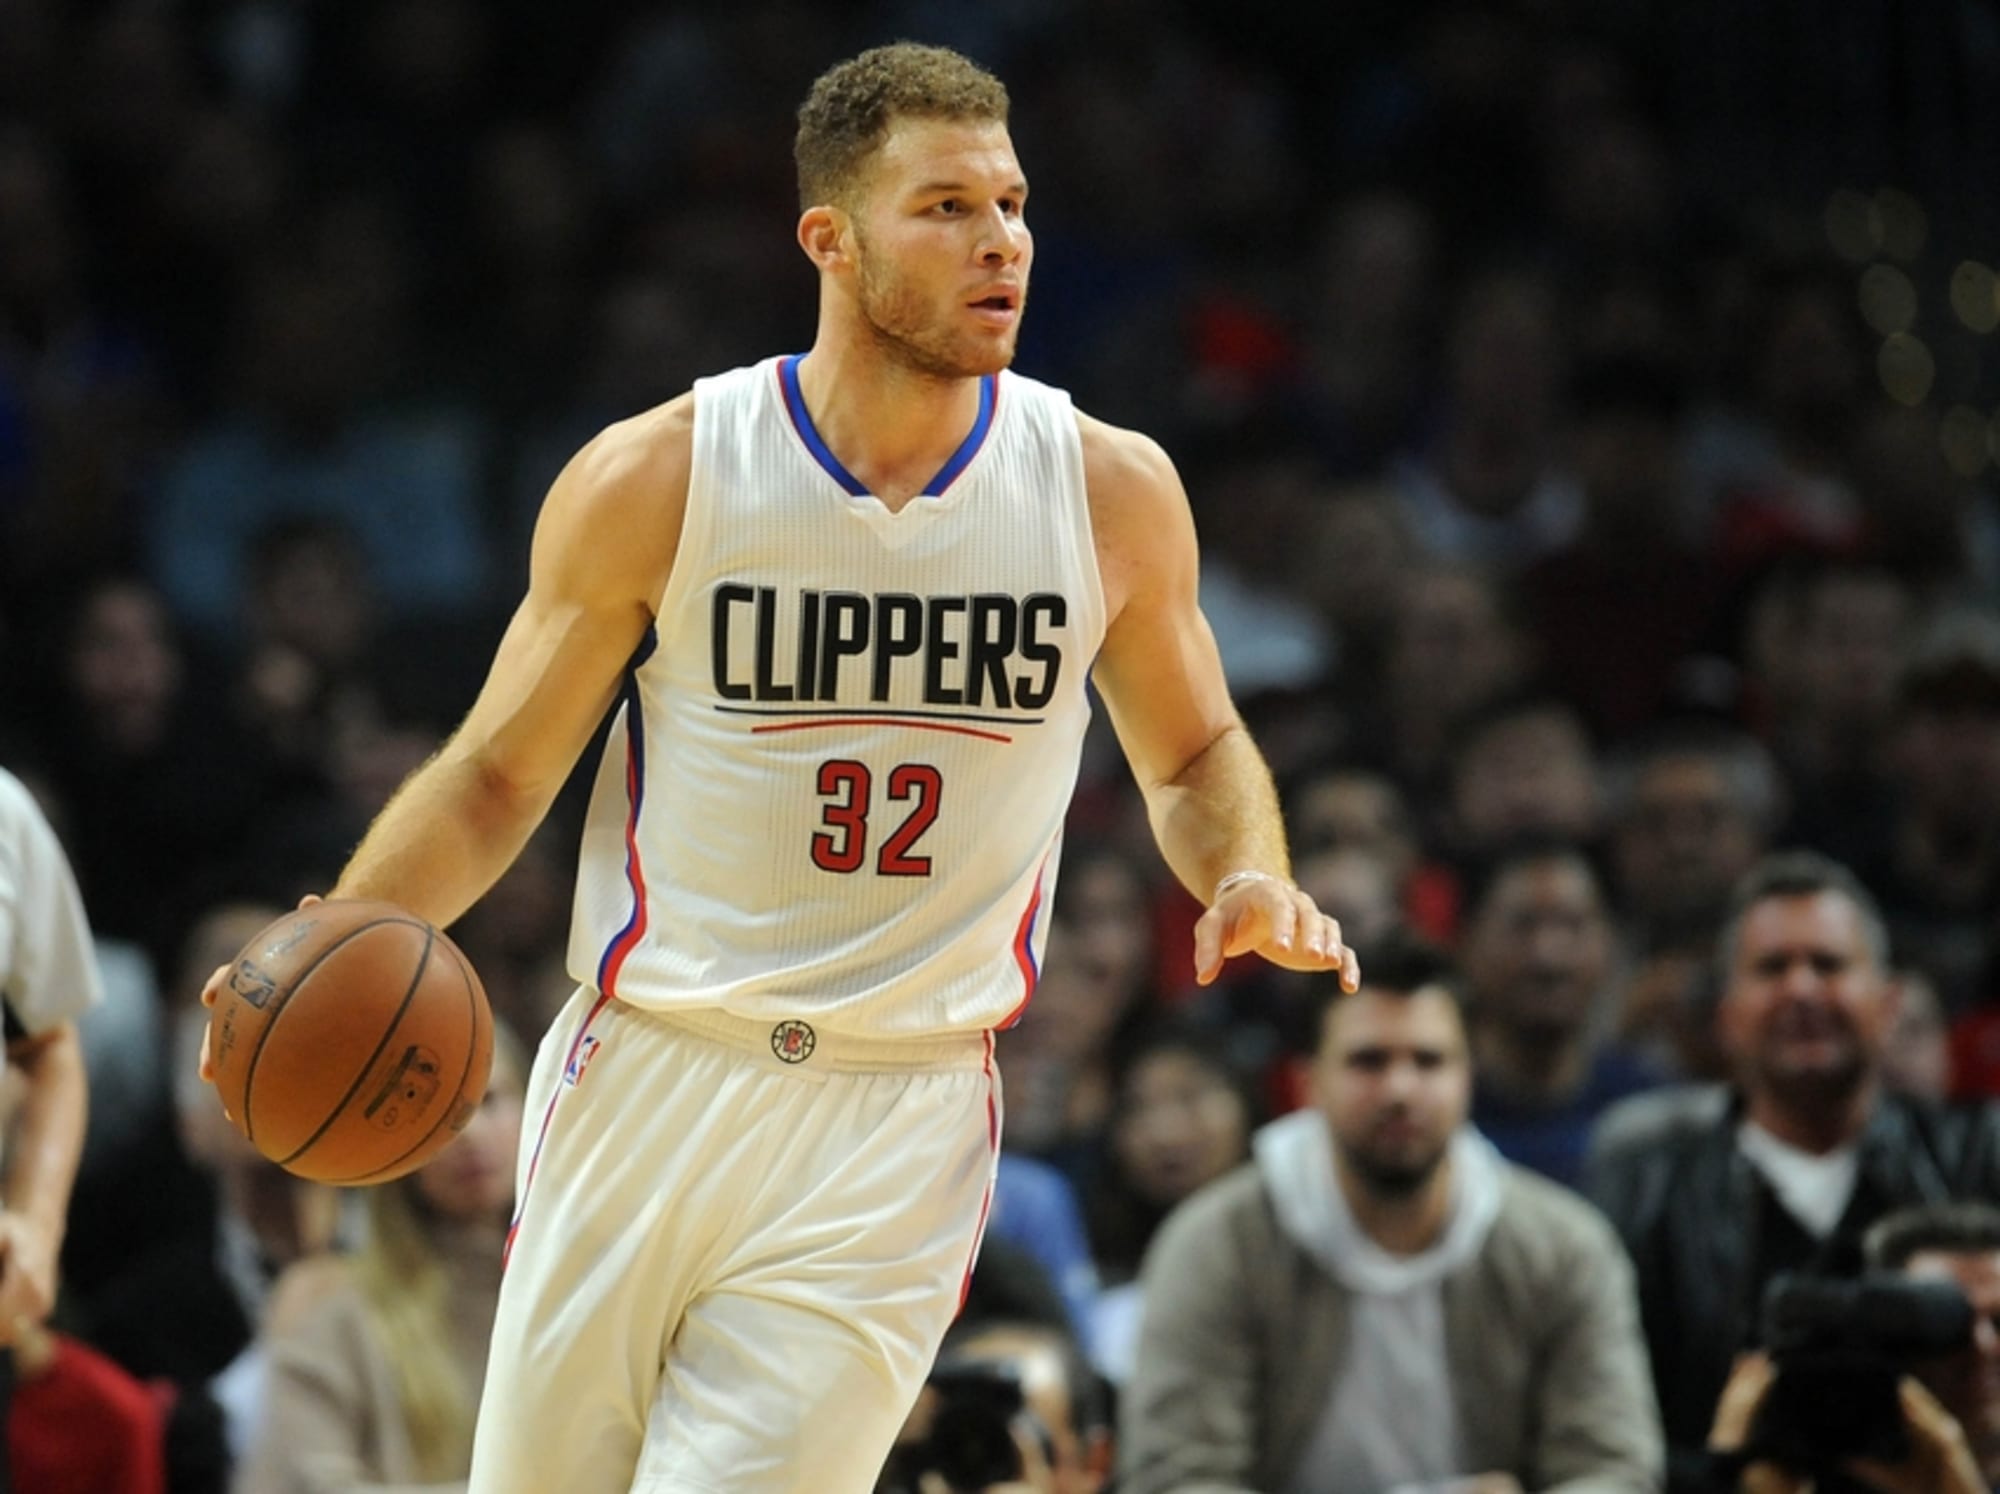 Photo: Los Angeles Clippers Blake Griffin dunks over Boston